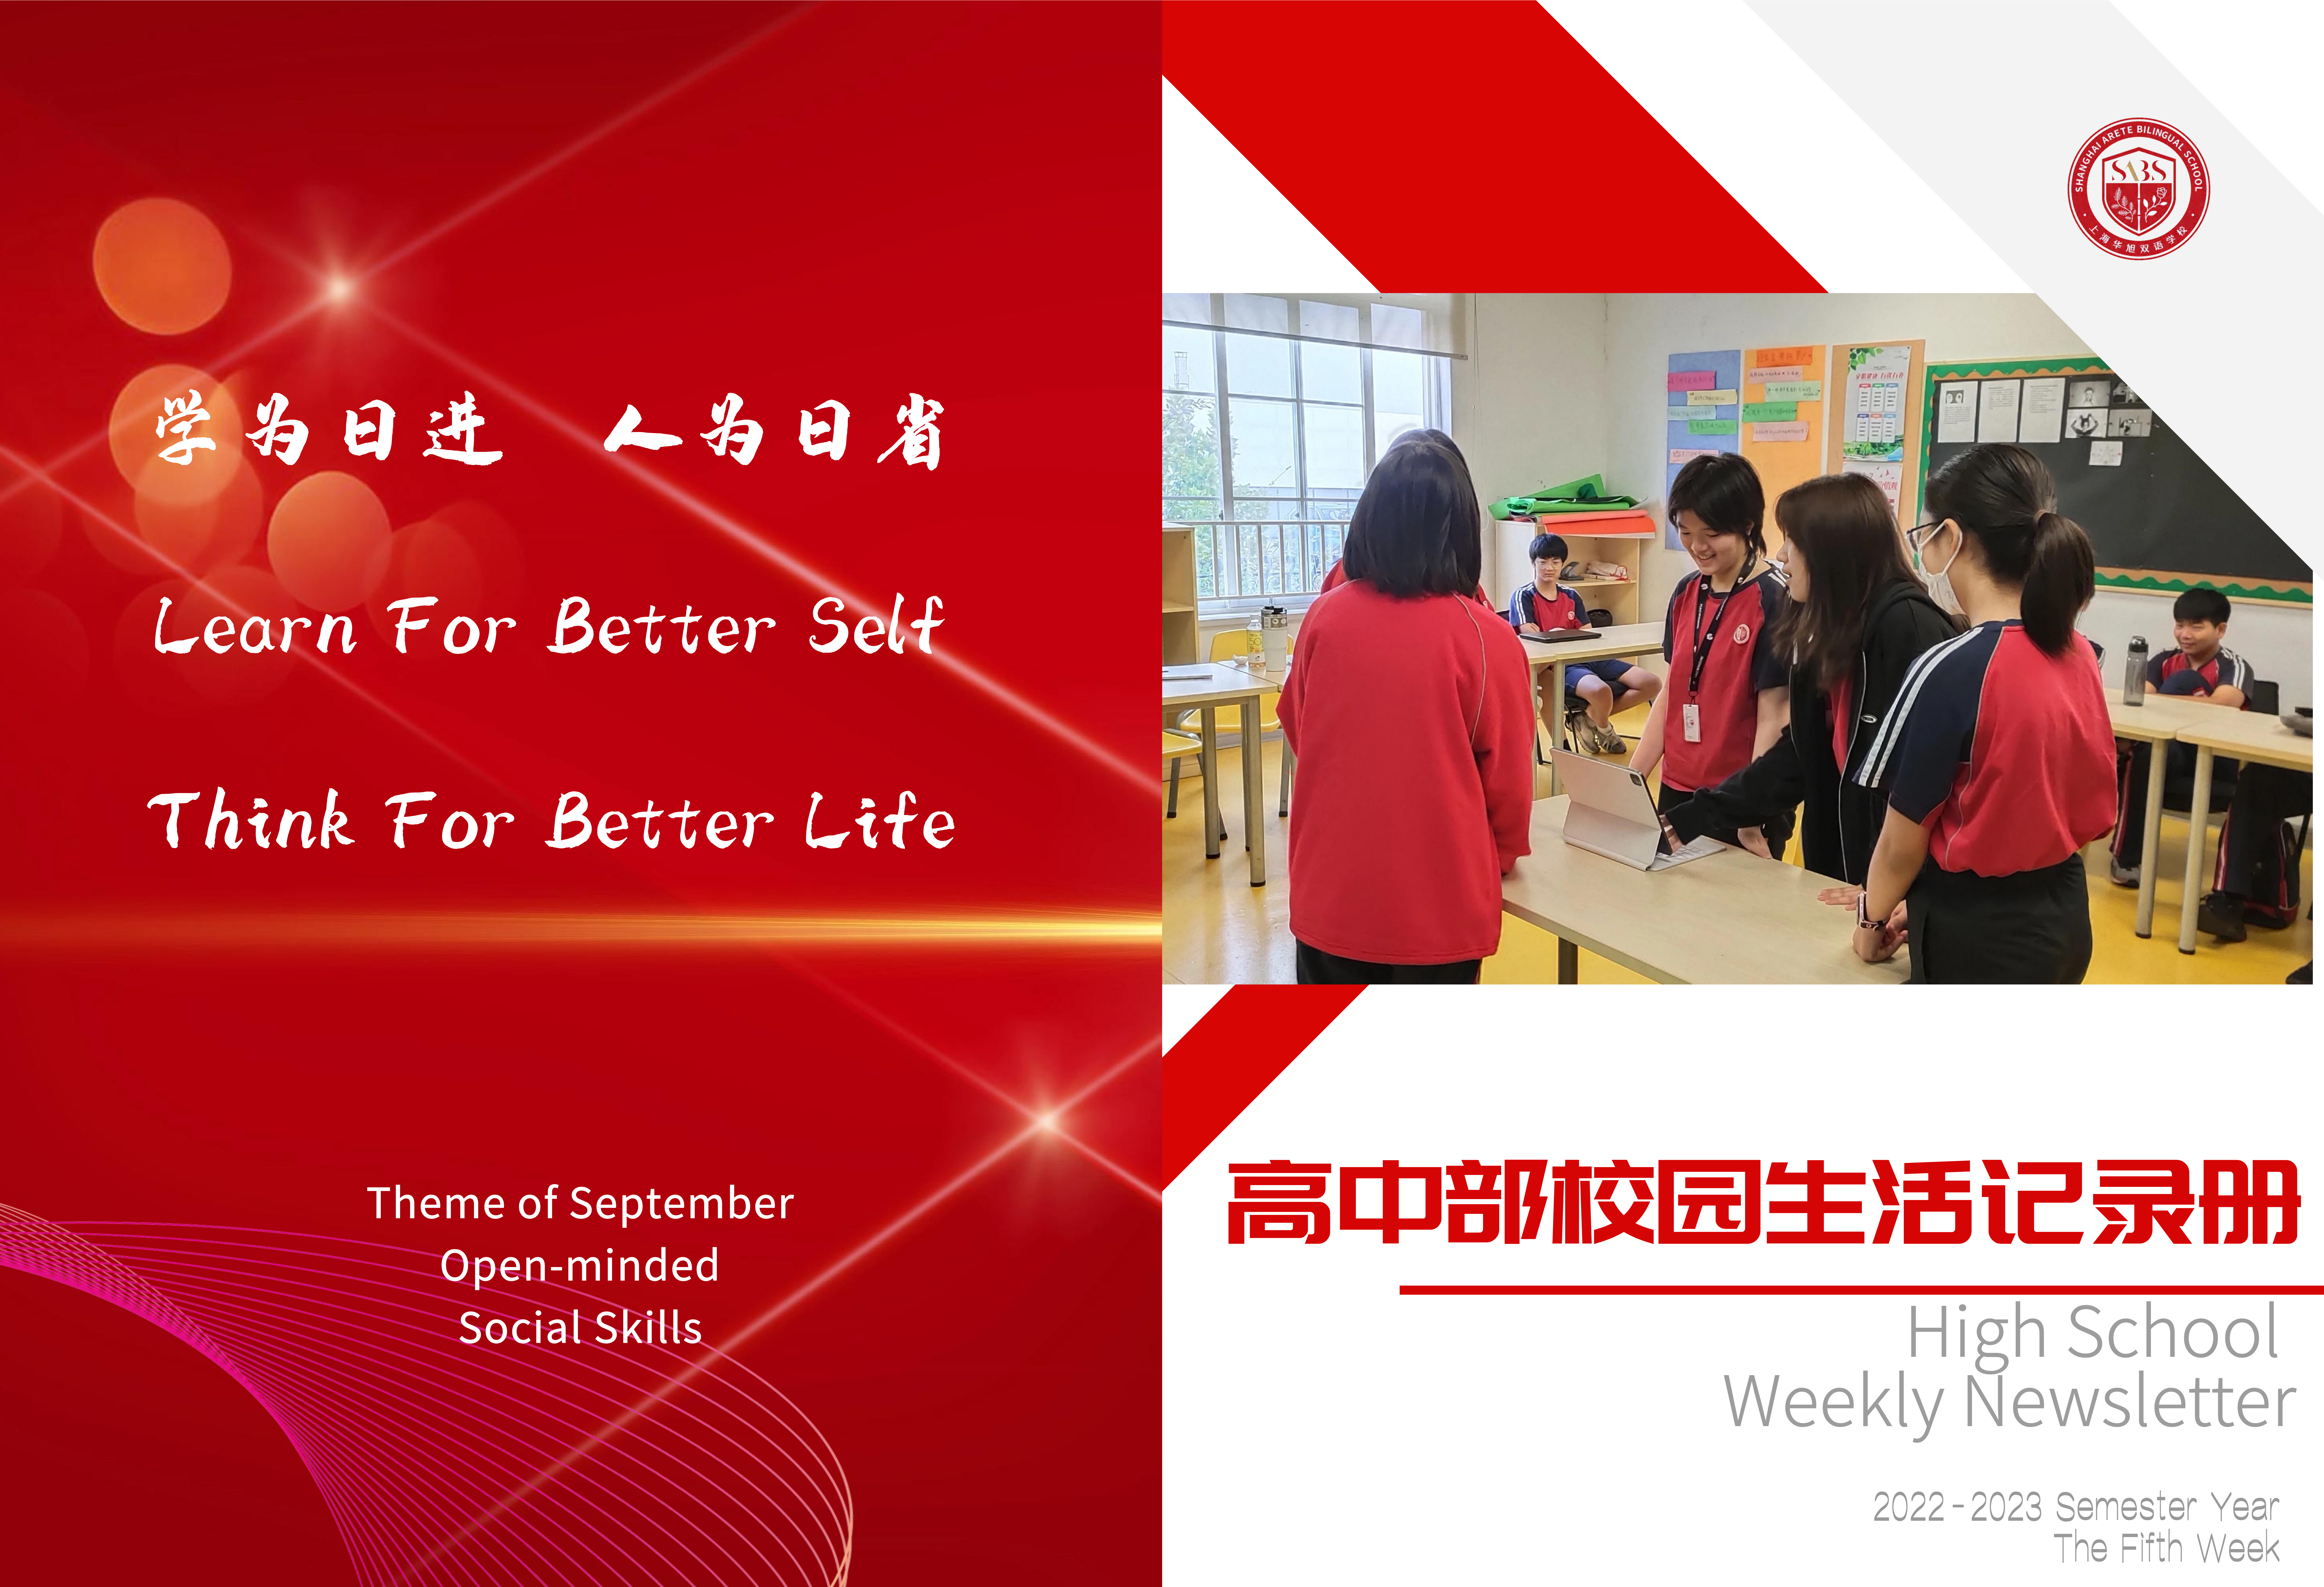 HS 5th Week Newsletter (English 2022-2023 1st semester)_00.png